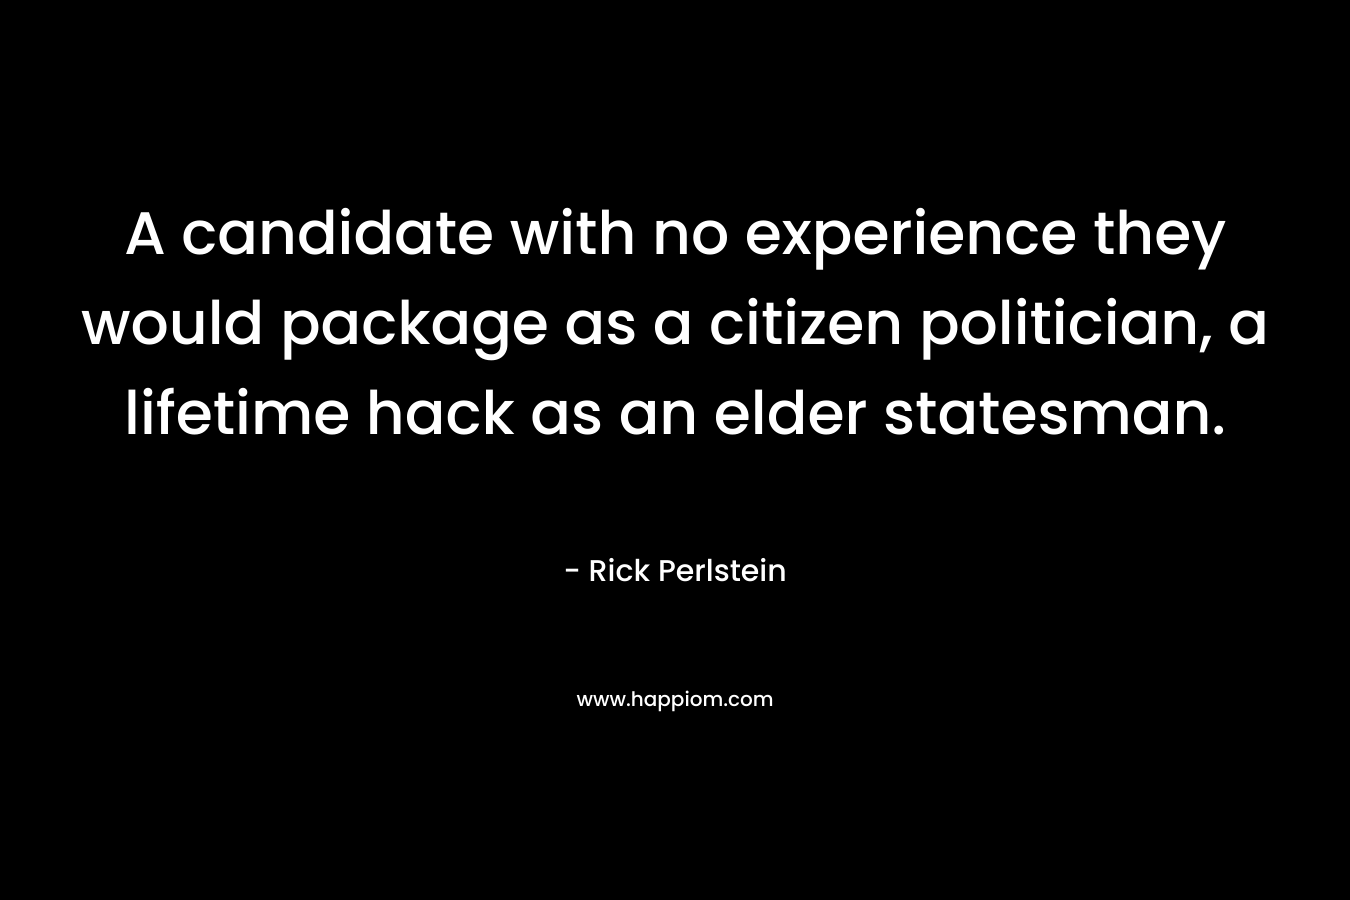 A candidate with no experience they would package as a citizen politician, a lifetime hack as an elder statesman.